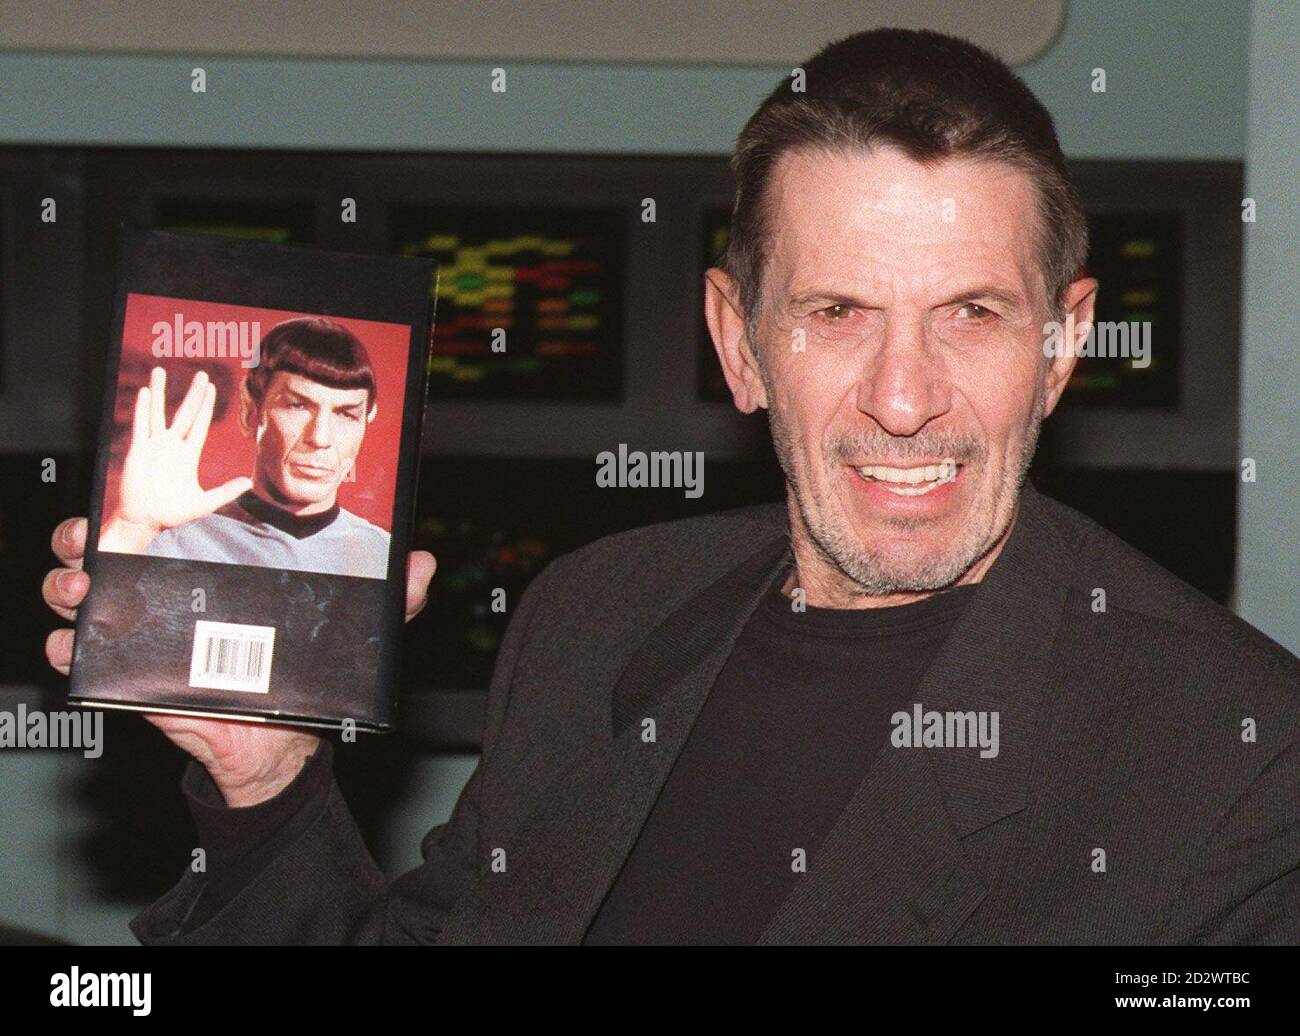 Actor Leonard Nimoy beamed down into the Science Museum, south-west London, to launch his autobiography. The actor is most famous for his portrayal of Mr Spock in the cult sci-fi series Star Trek. Stock Photo